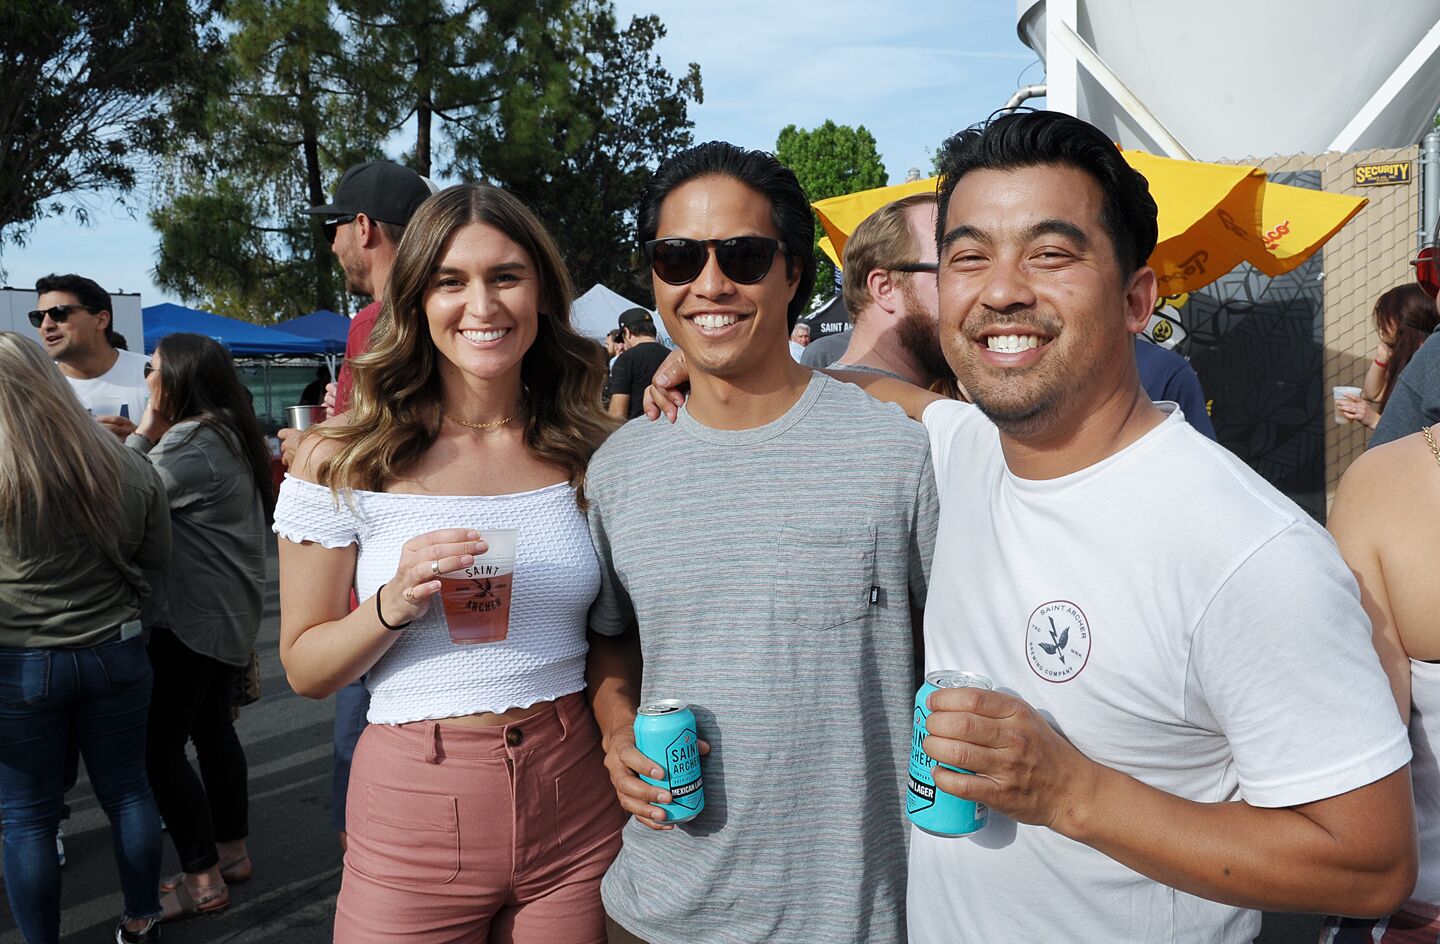 Guests at Saint Archer Brewing Co.'s sixth anniversary enjoyed live music, food trucks and the debut of the Hazy Rye with Galaxy Hops IPA specialty brew at Saint Archer Brewing Co. in Miramar on Saturday, May 18, 2019.